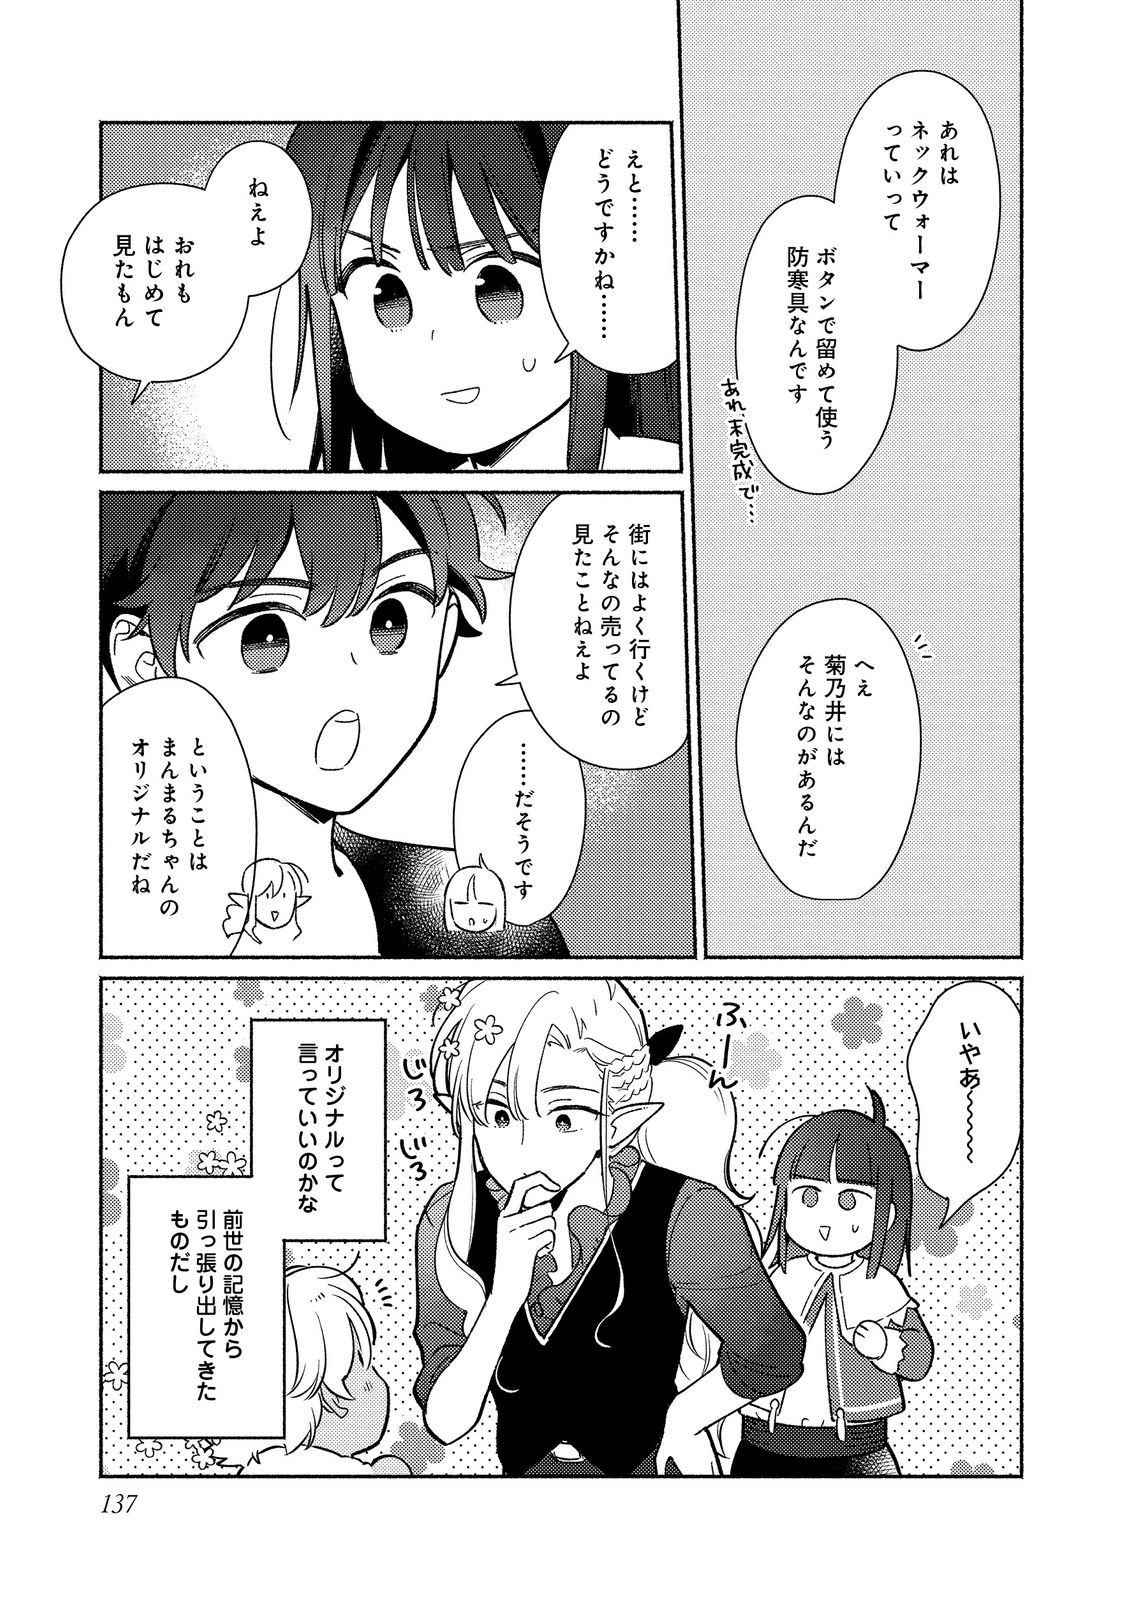 I’m the White Pig Nobleman 第20.1話 - Page 11